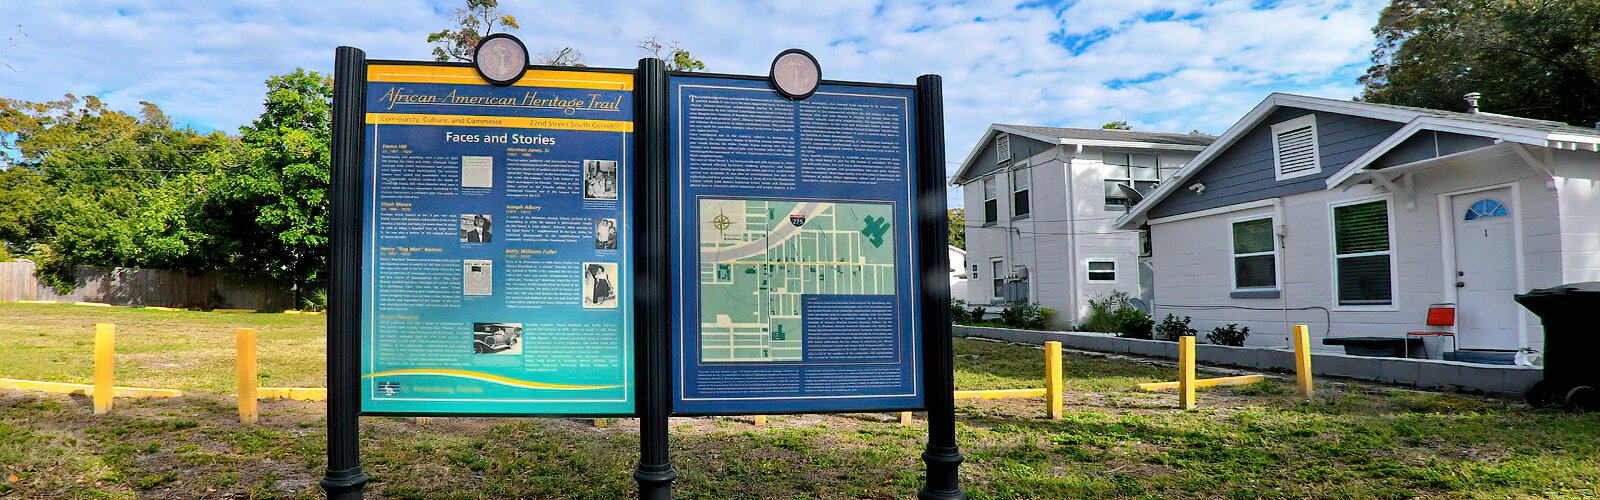  Nineteen markers on the African American Heritage Trail that starts at the Carter G. Woodson Museum provide details about the history of this St Petersburg Black community.